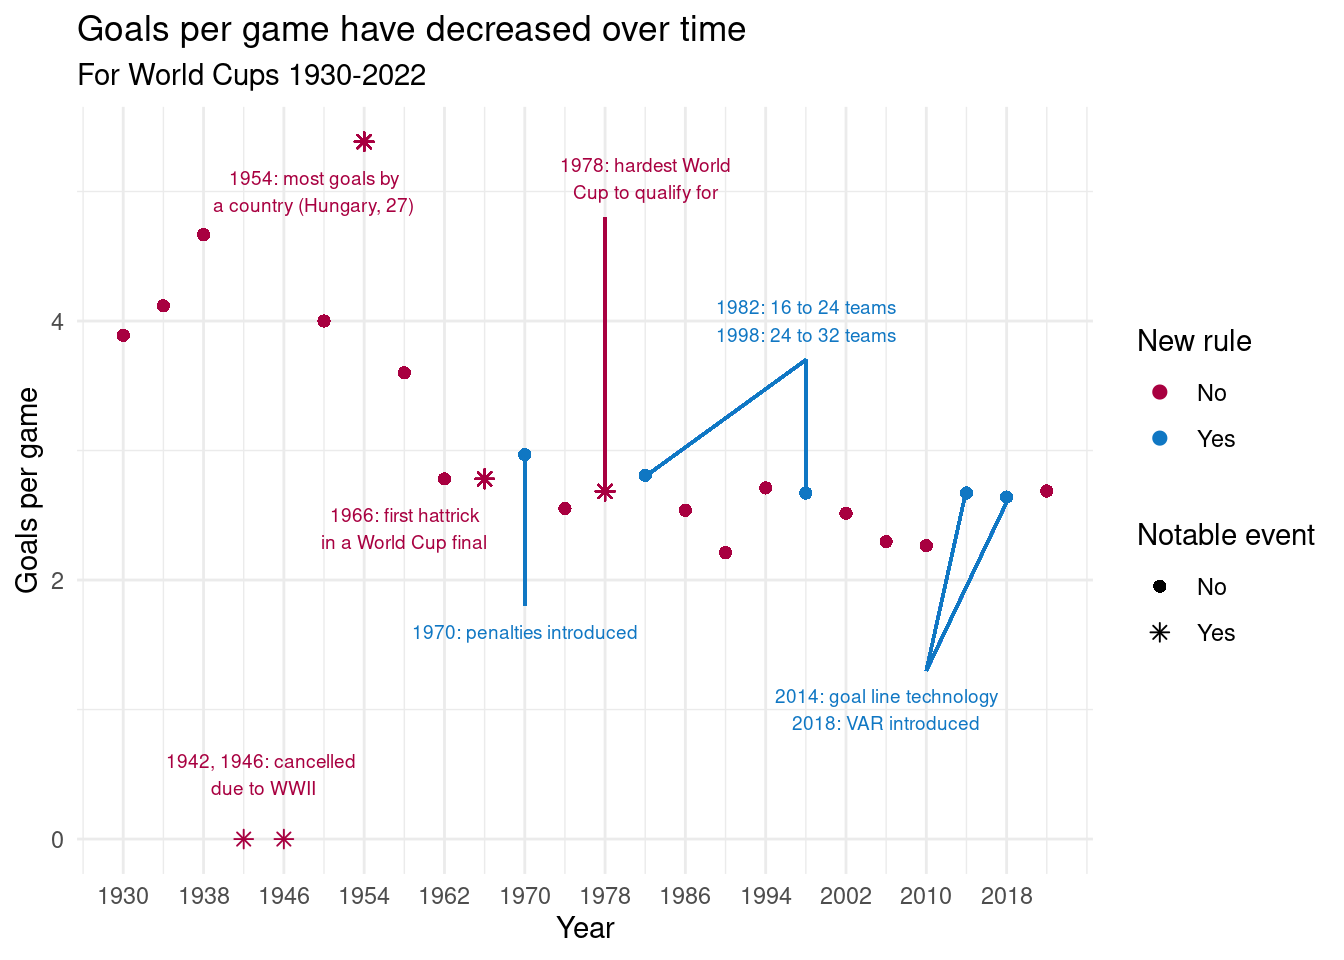 Goals per game have decreased over time.